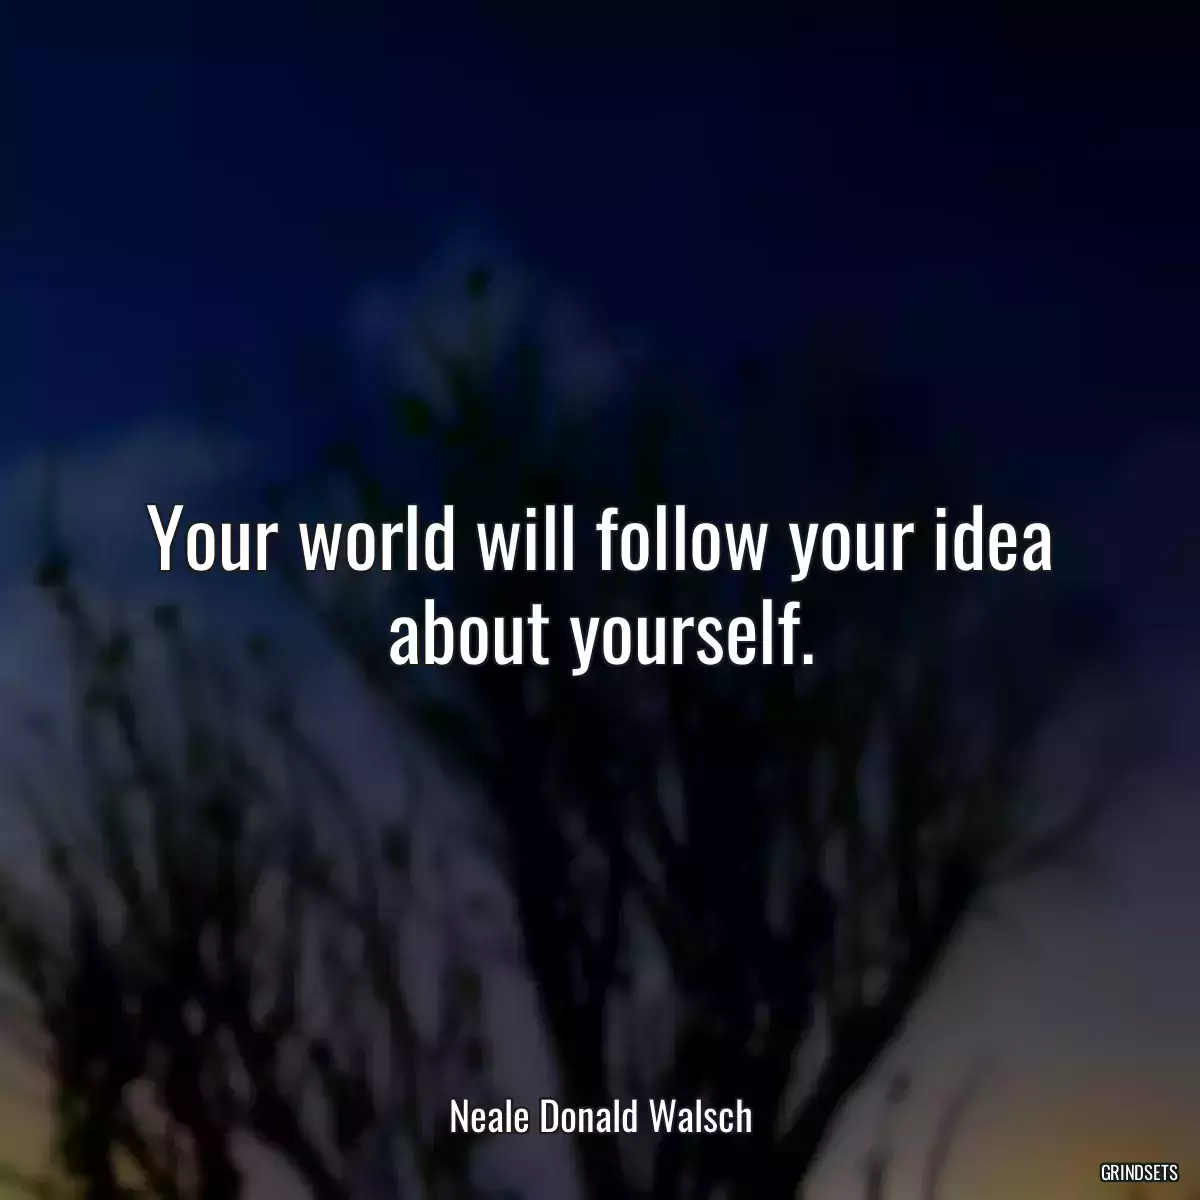 Your world will follow your idea about yourself.